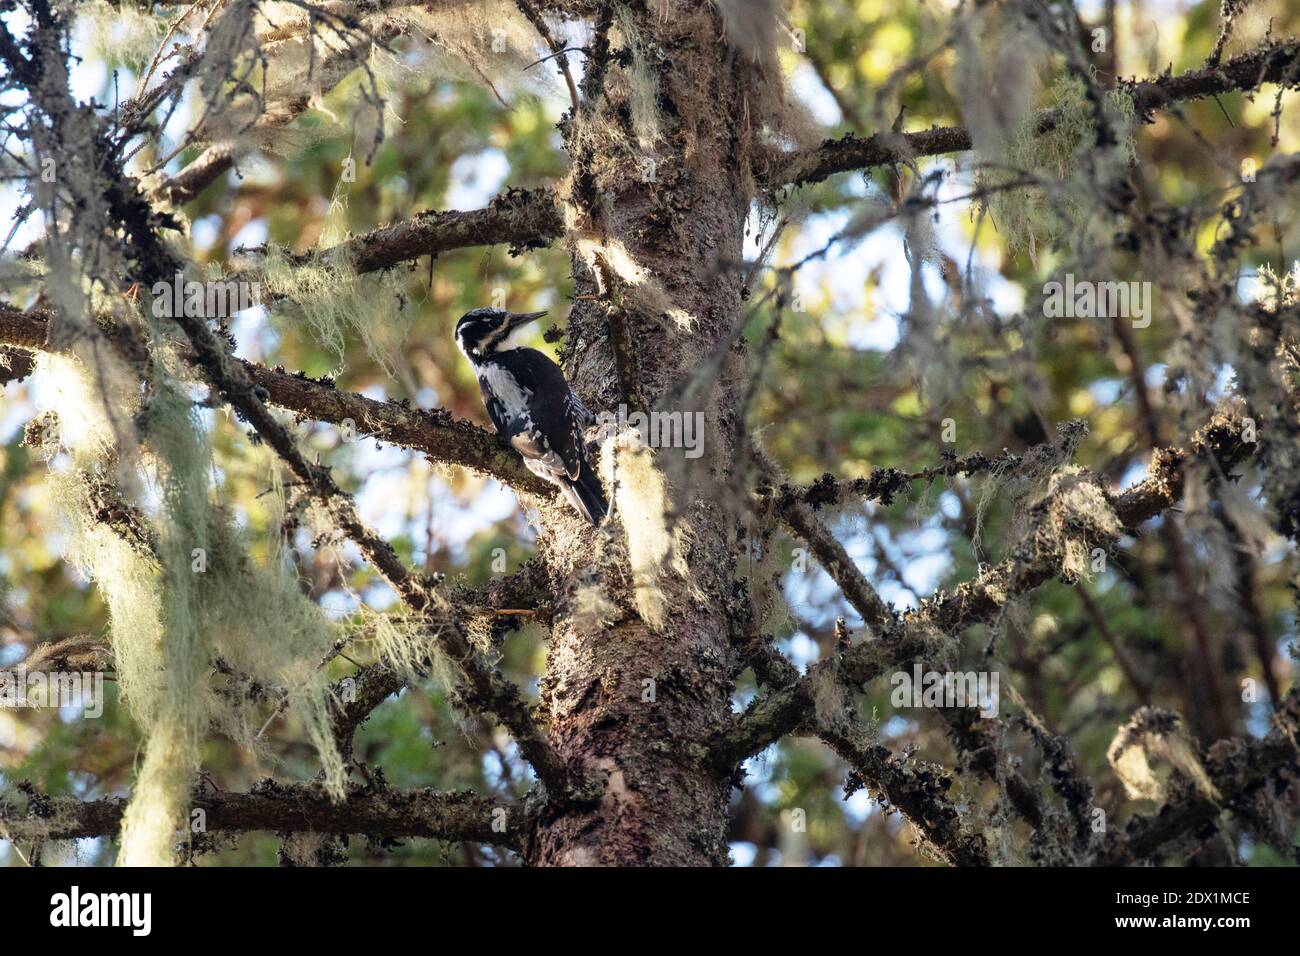 European woodland bird Three-toed woodpecker, Picoides tridactylus on a spruce trunk in an old-growth forest in Estonia. Stock Photo